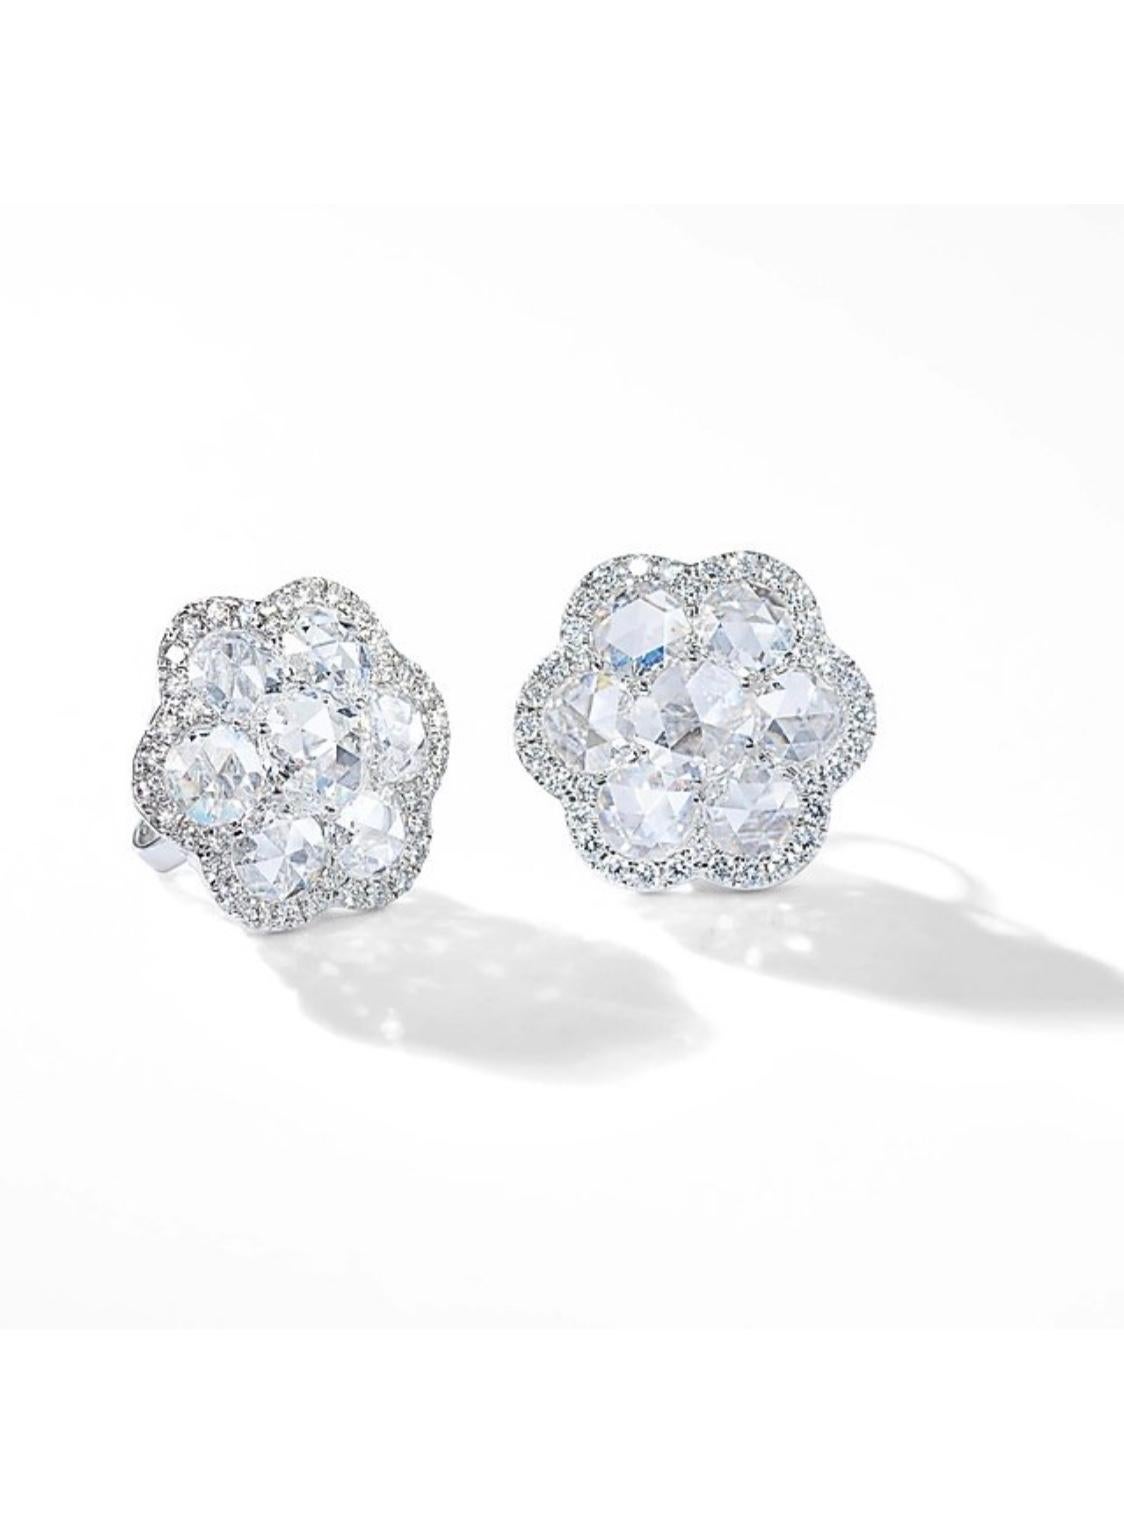 White Rose Cut Diamond Stud Earrings in 18 Karat White Gold In New Condition For Sale In New York, NY